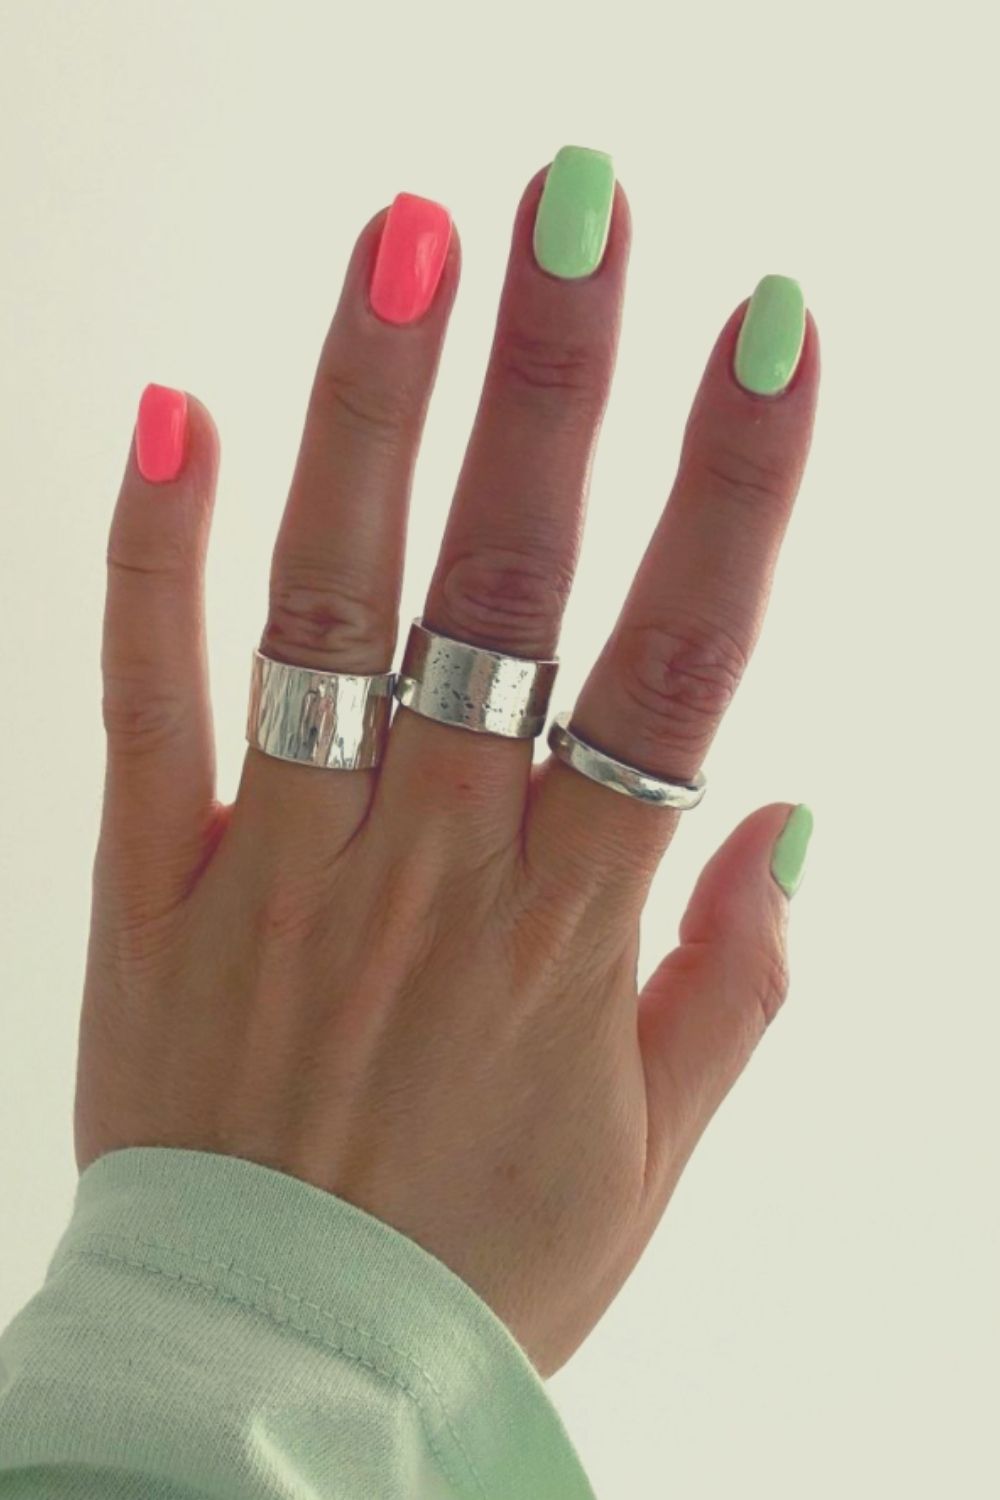 Cute summer nails to Try out in 2021